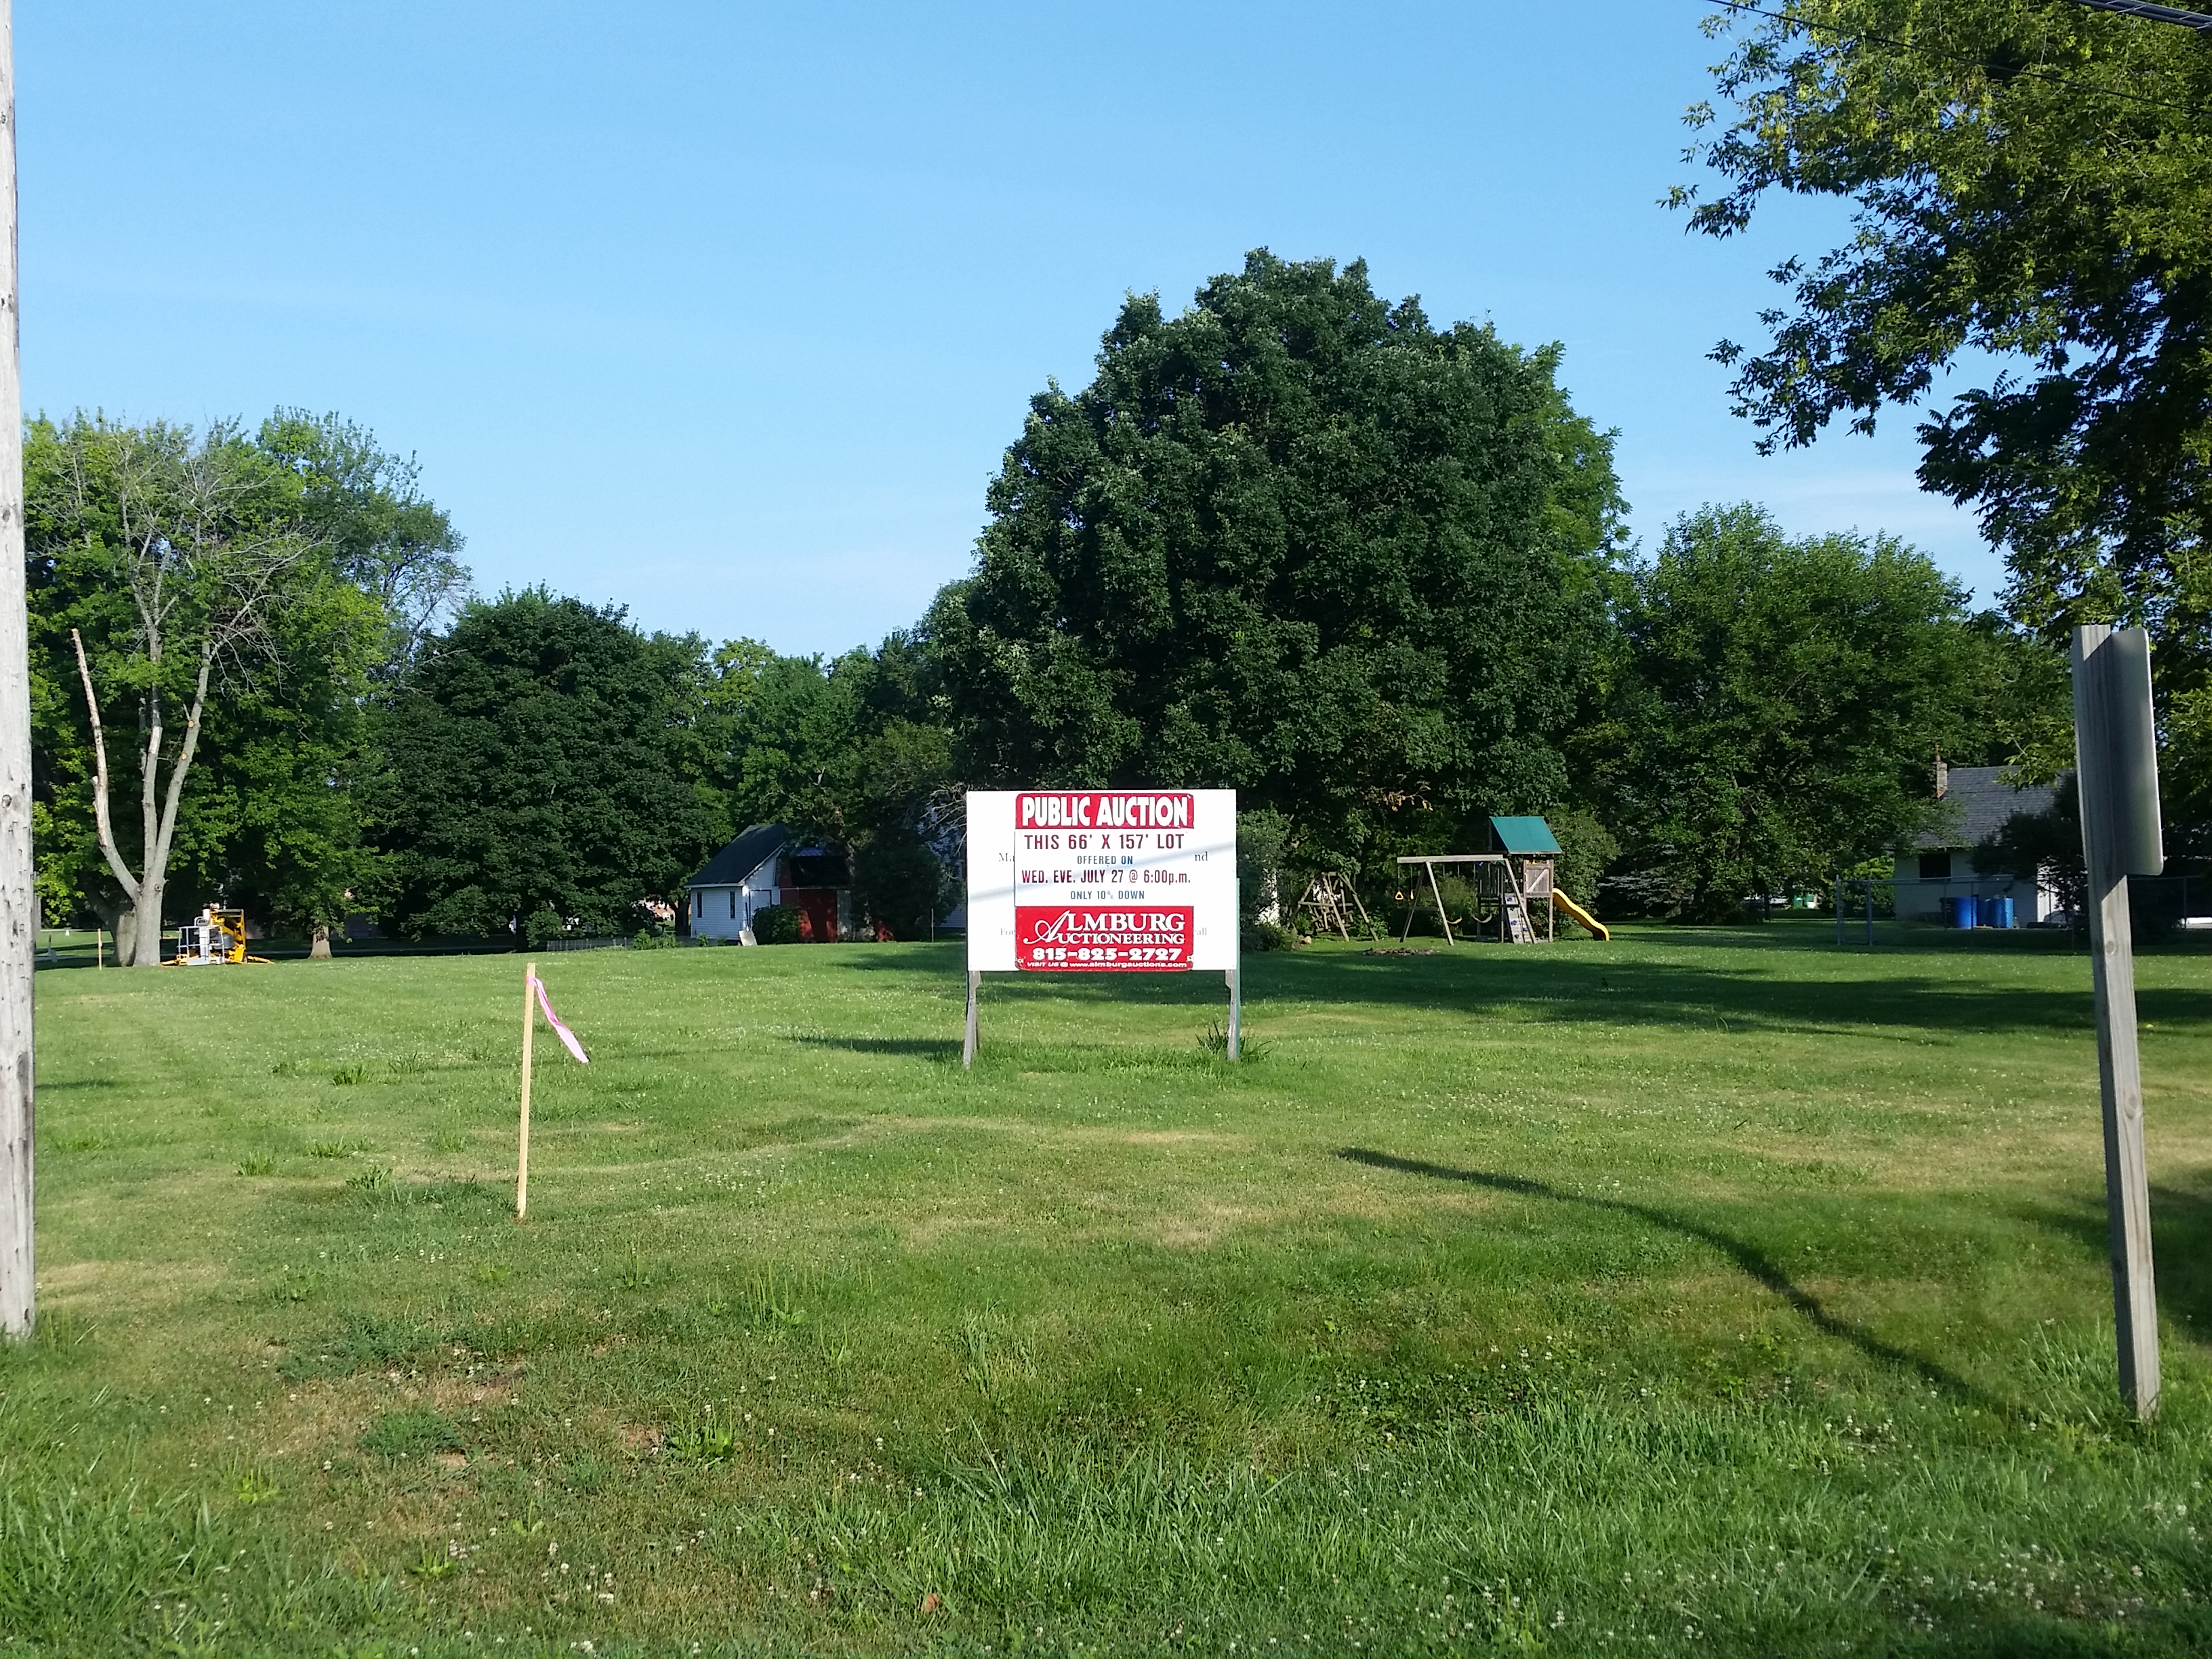 Real Esate Auction of residential lot July 27th Malta IL 6:00 p.m.